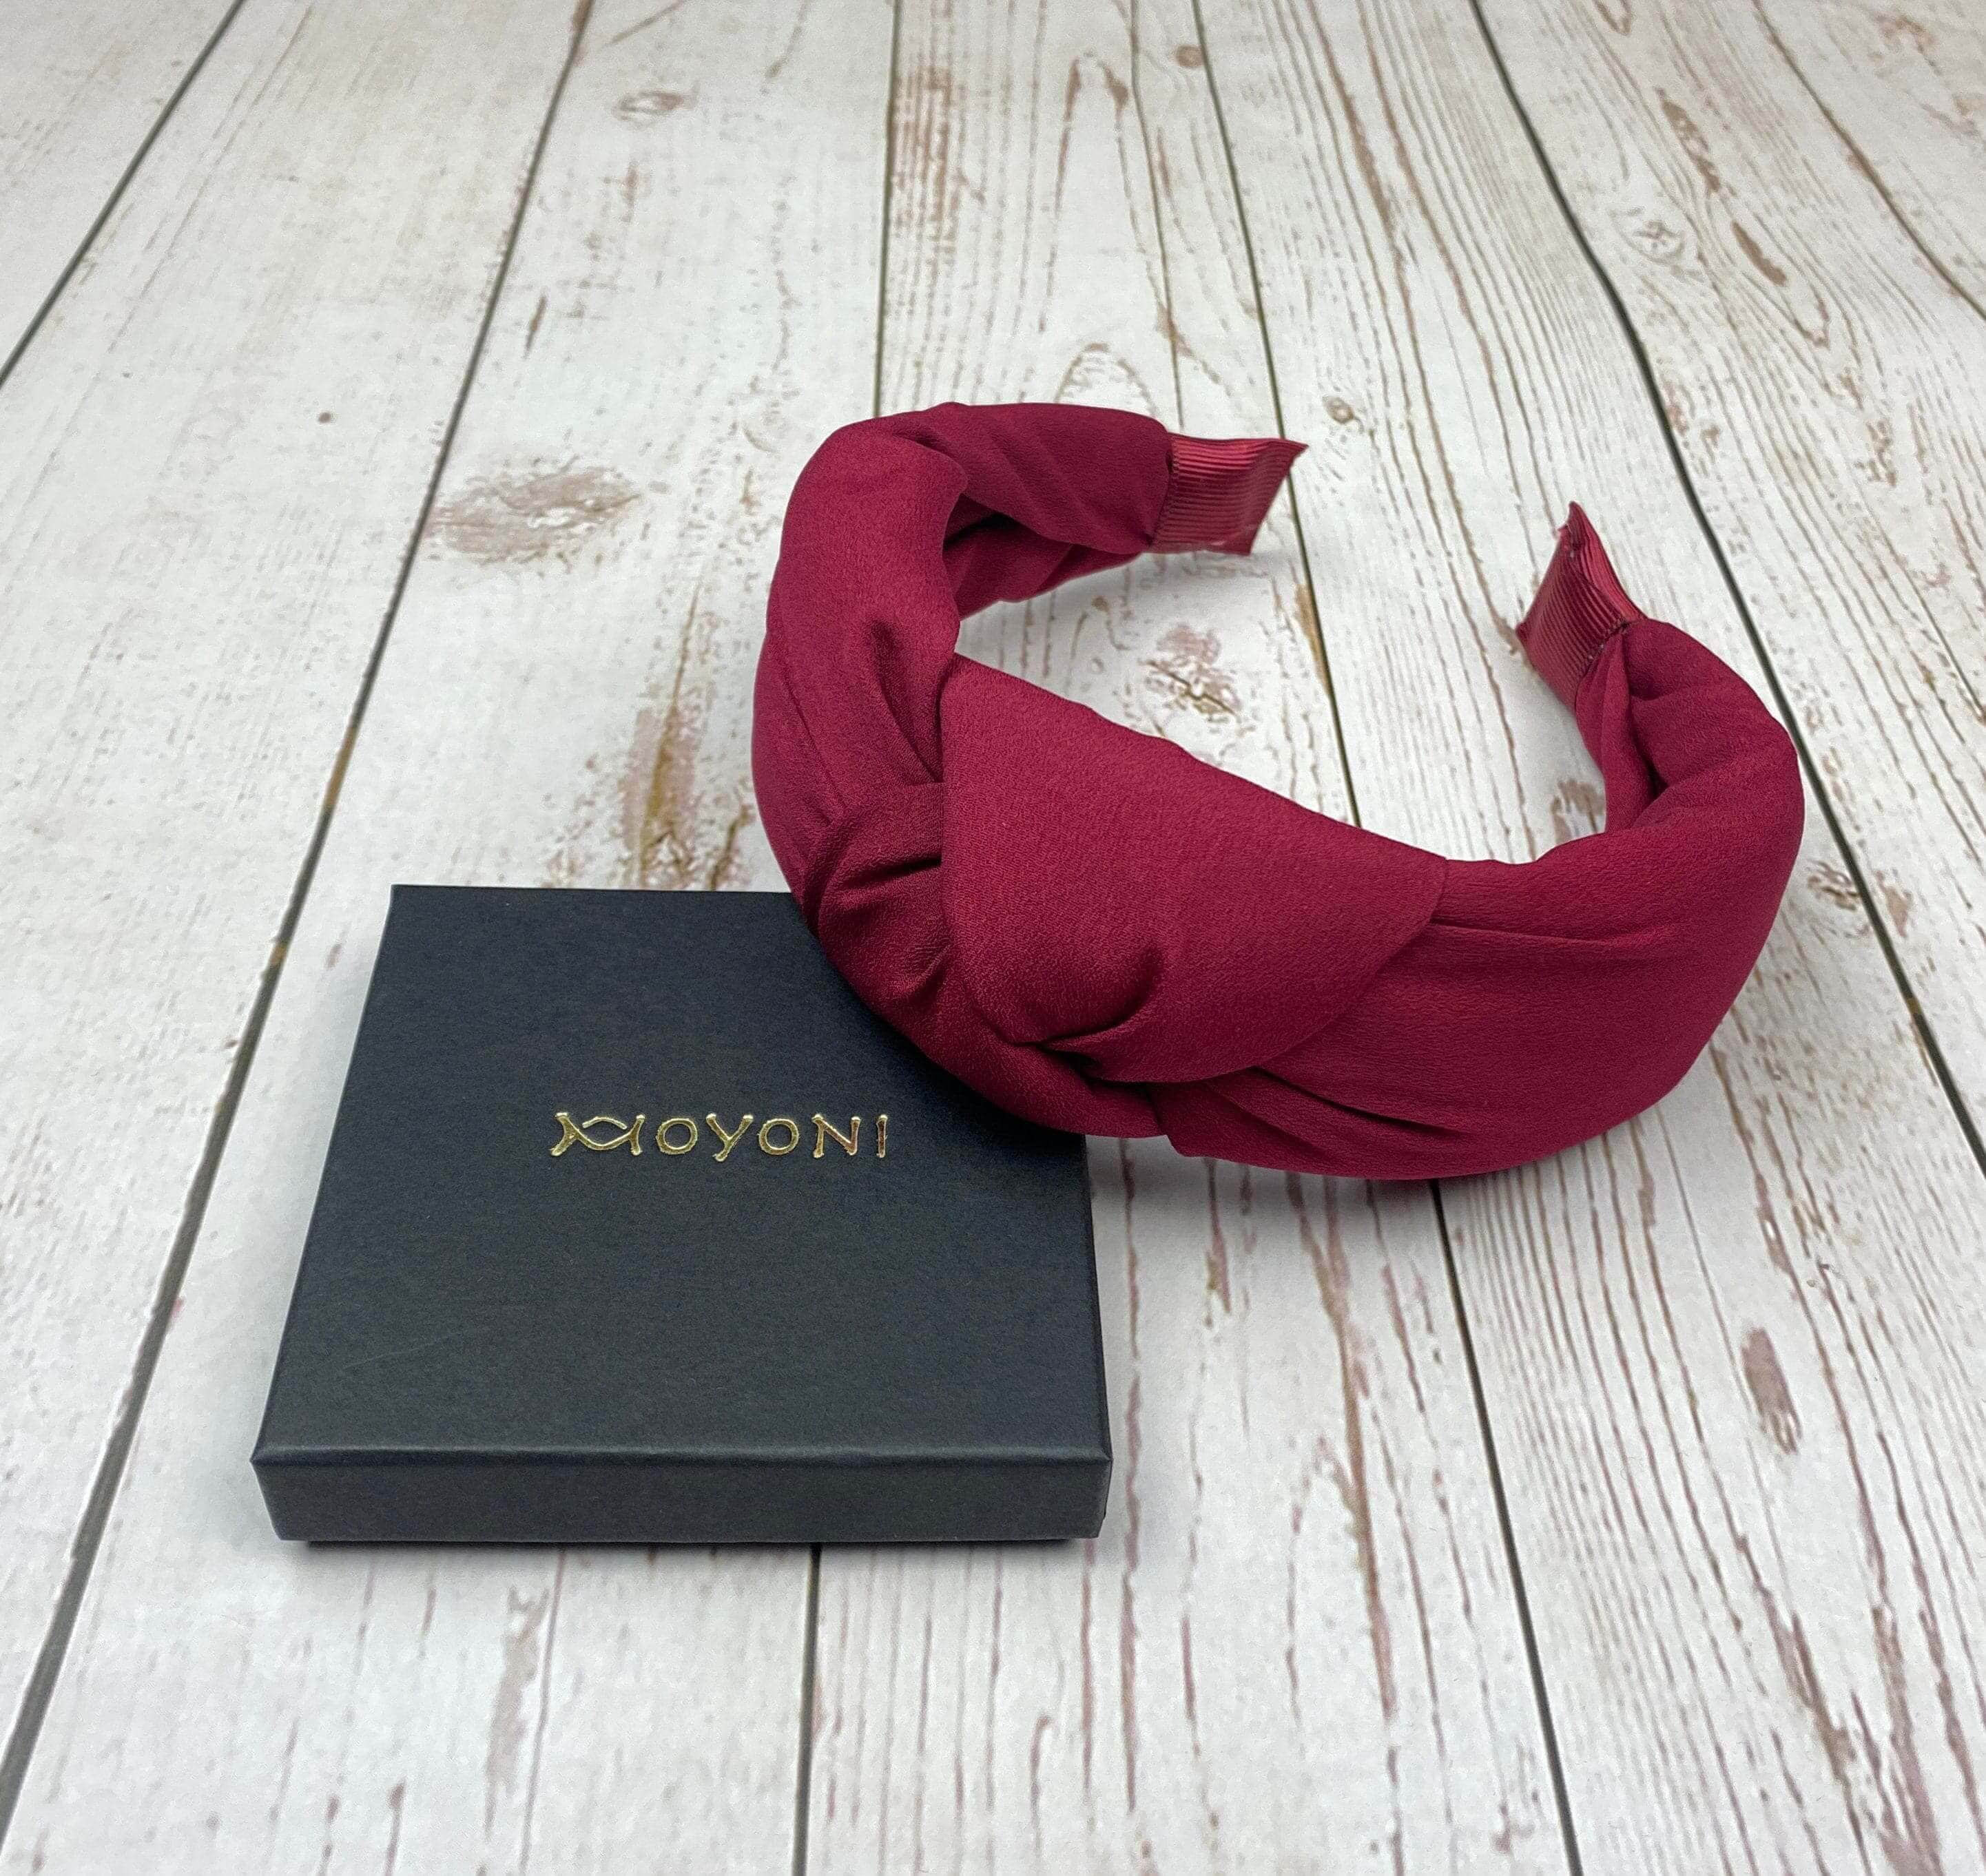 Are you looking for the perfect summer headband? Here are a few stylish and trendy burgundy headbands that will make you look amazing this season!